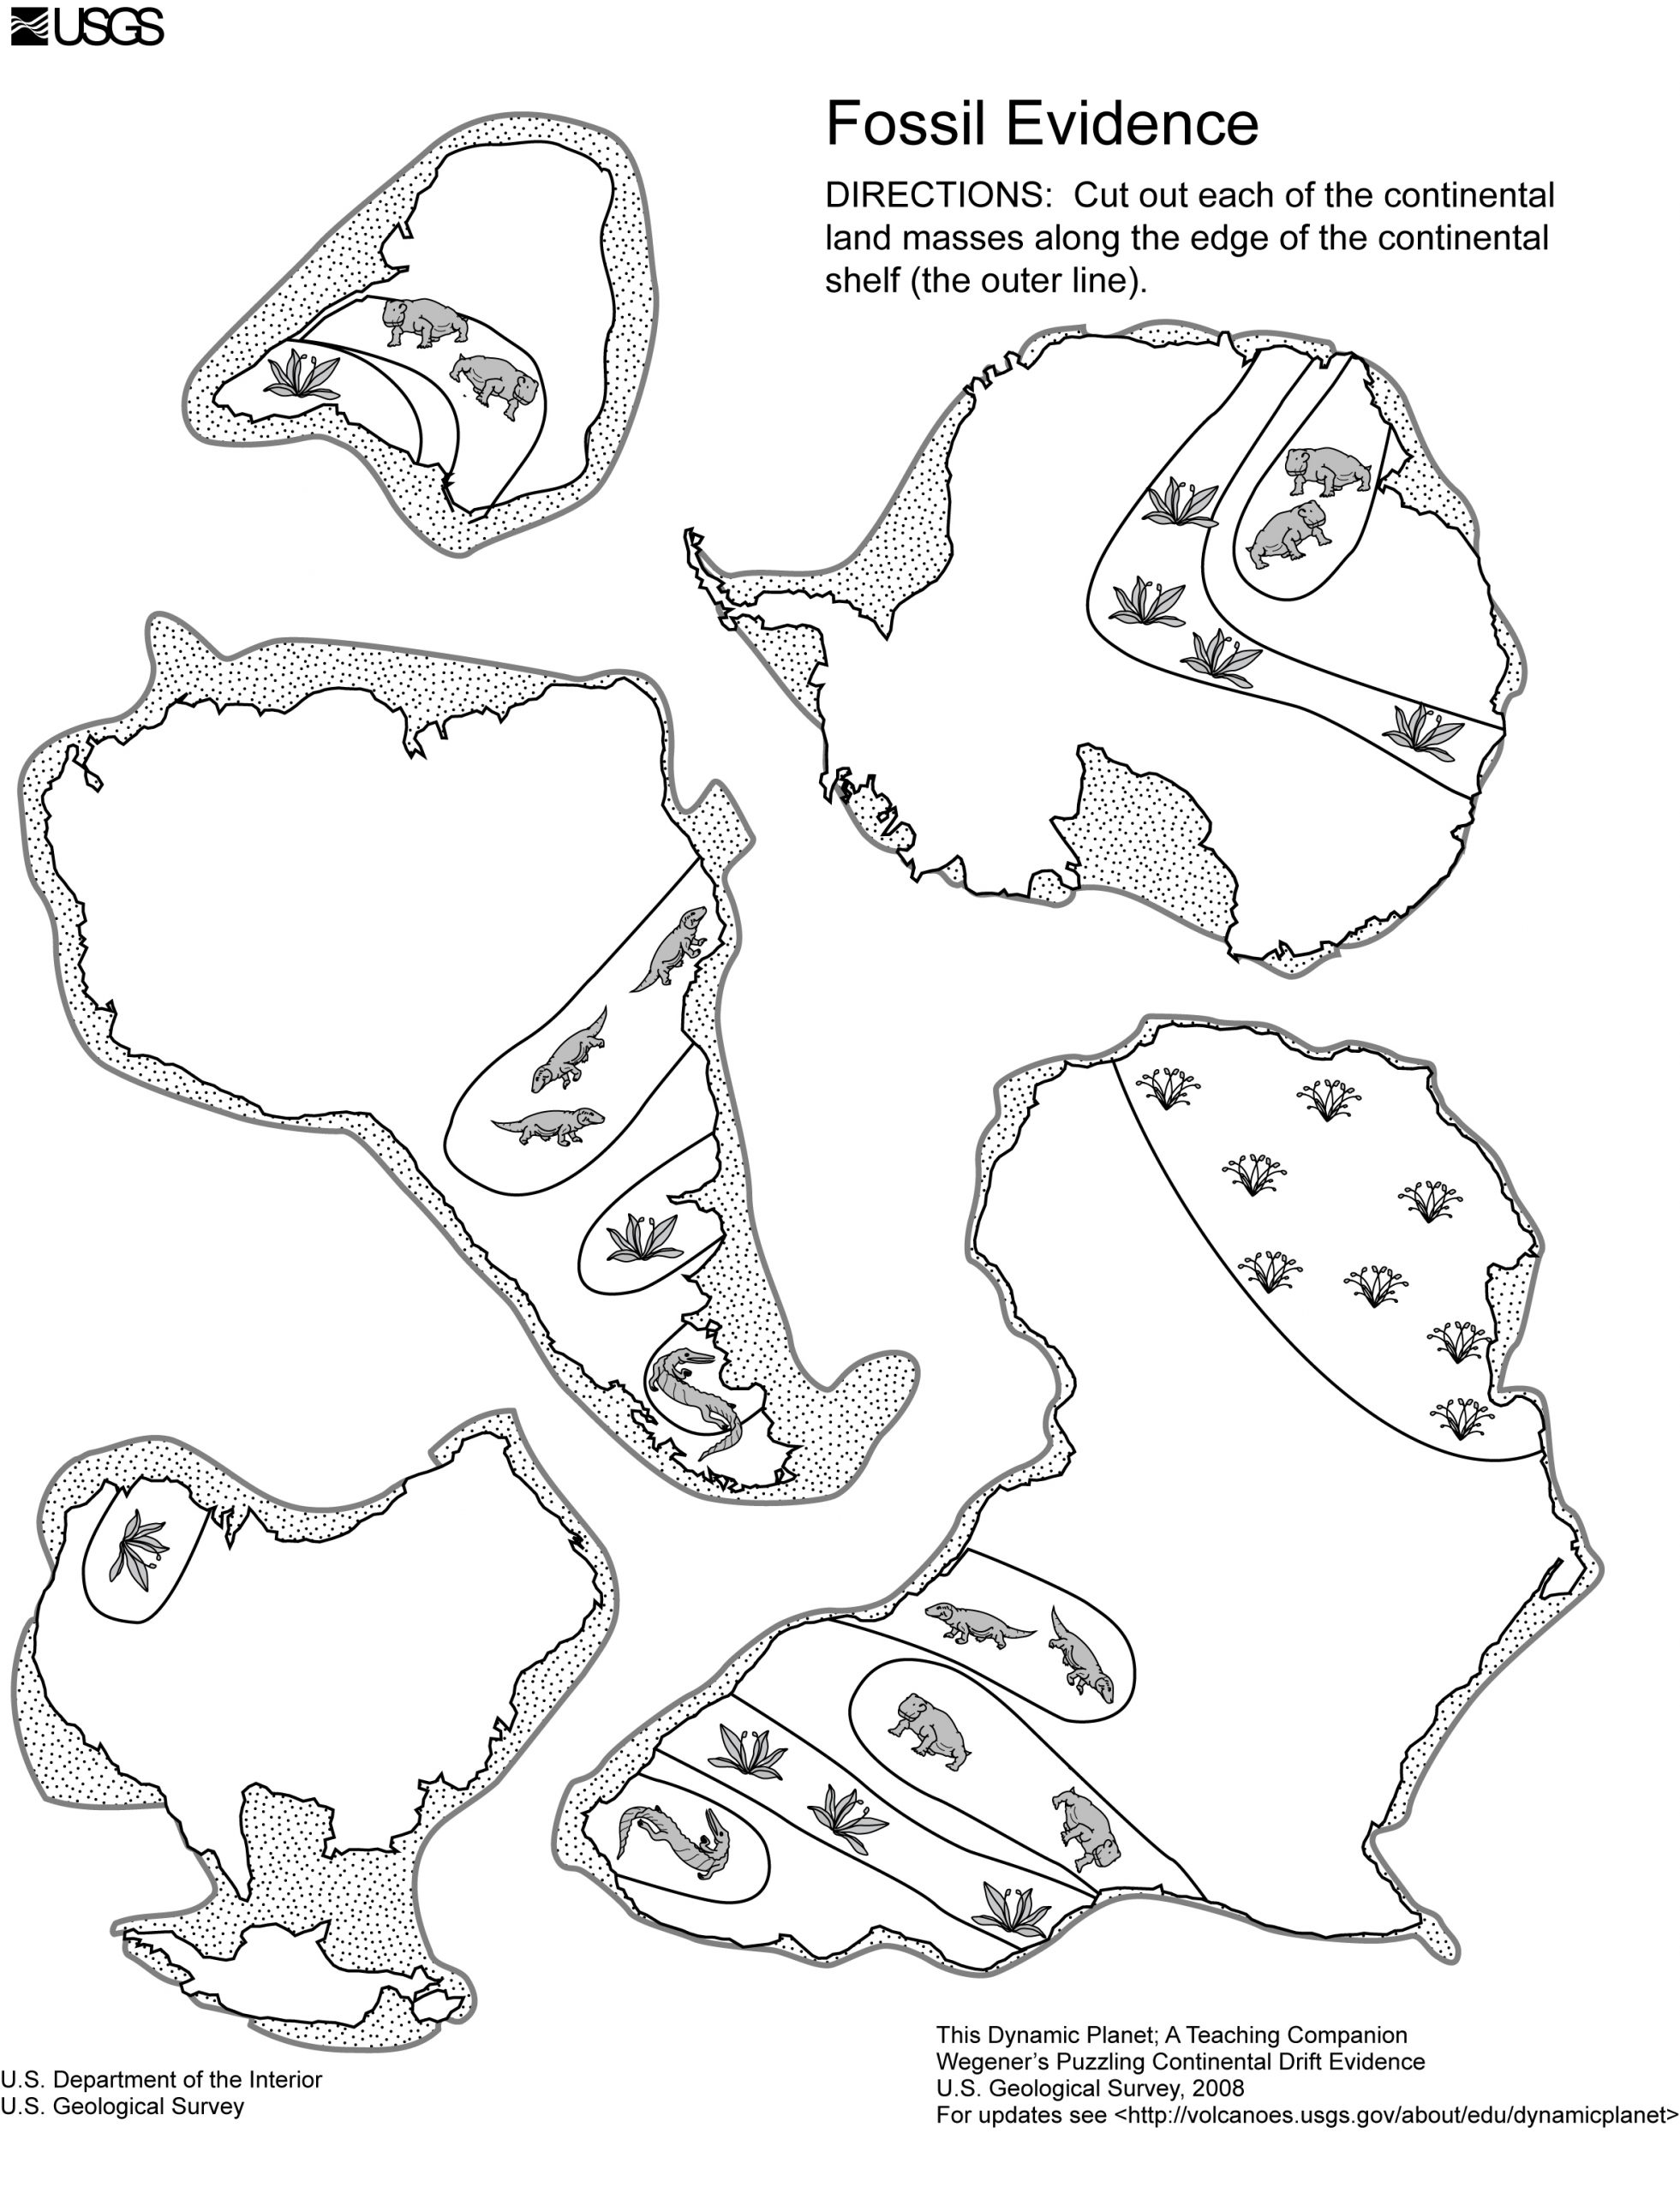 Five continents with their continental shelves and fossil locations for Exercise 1.1